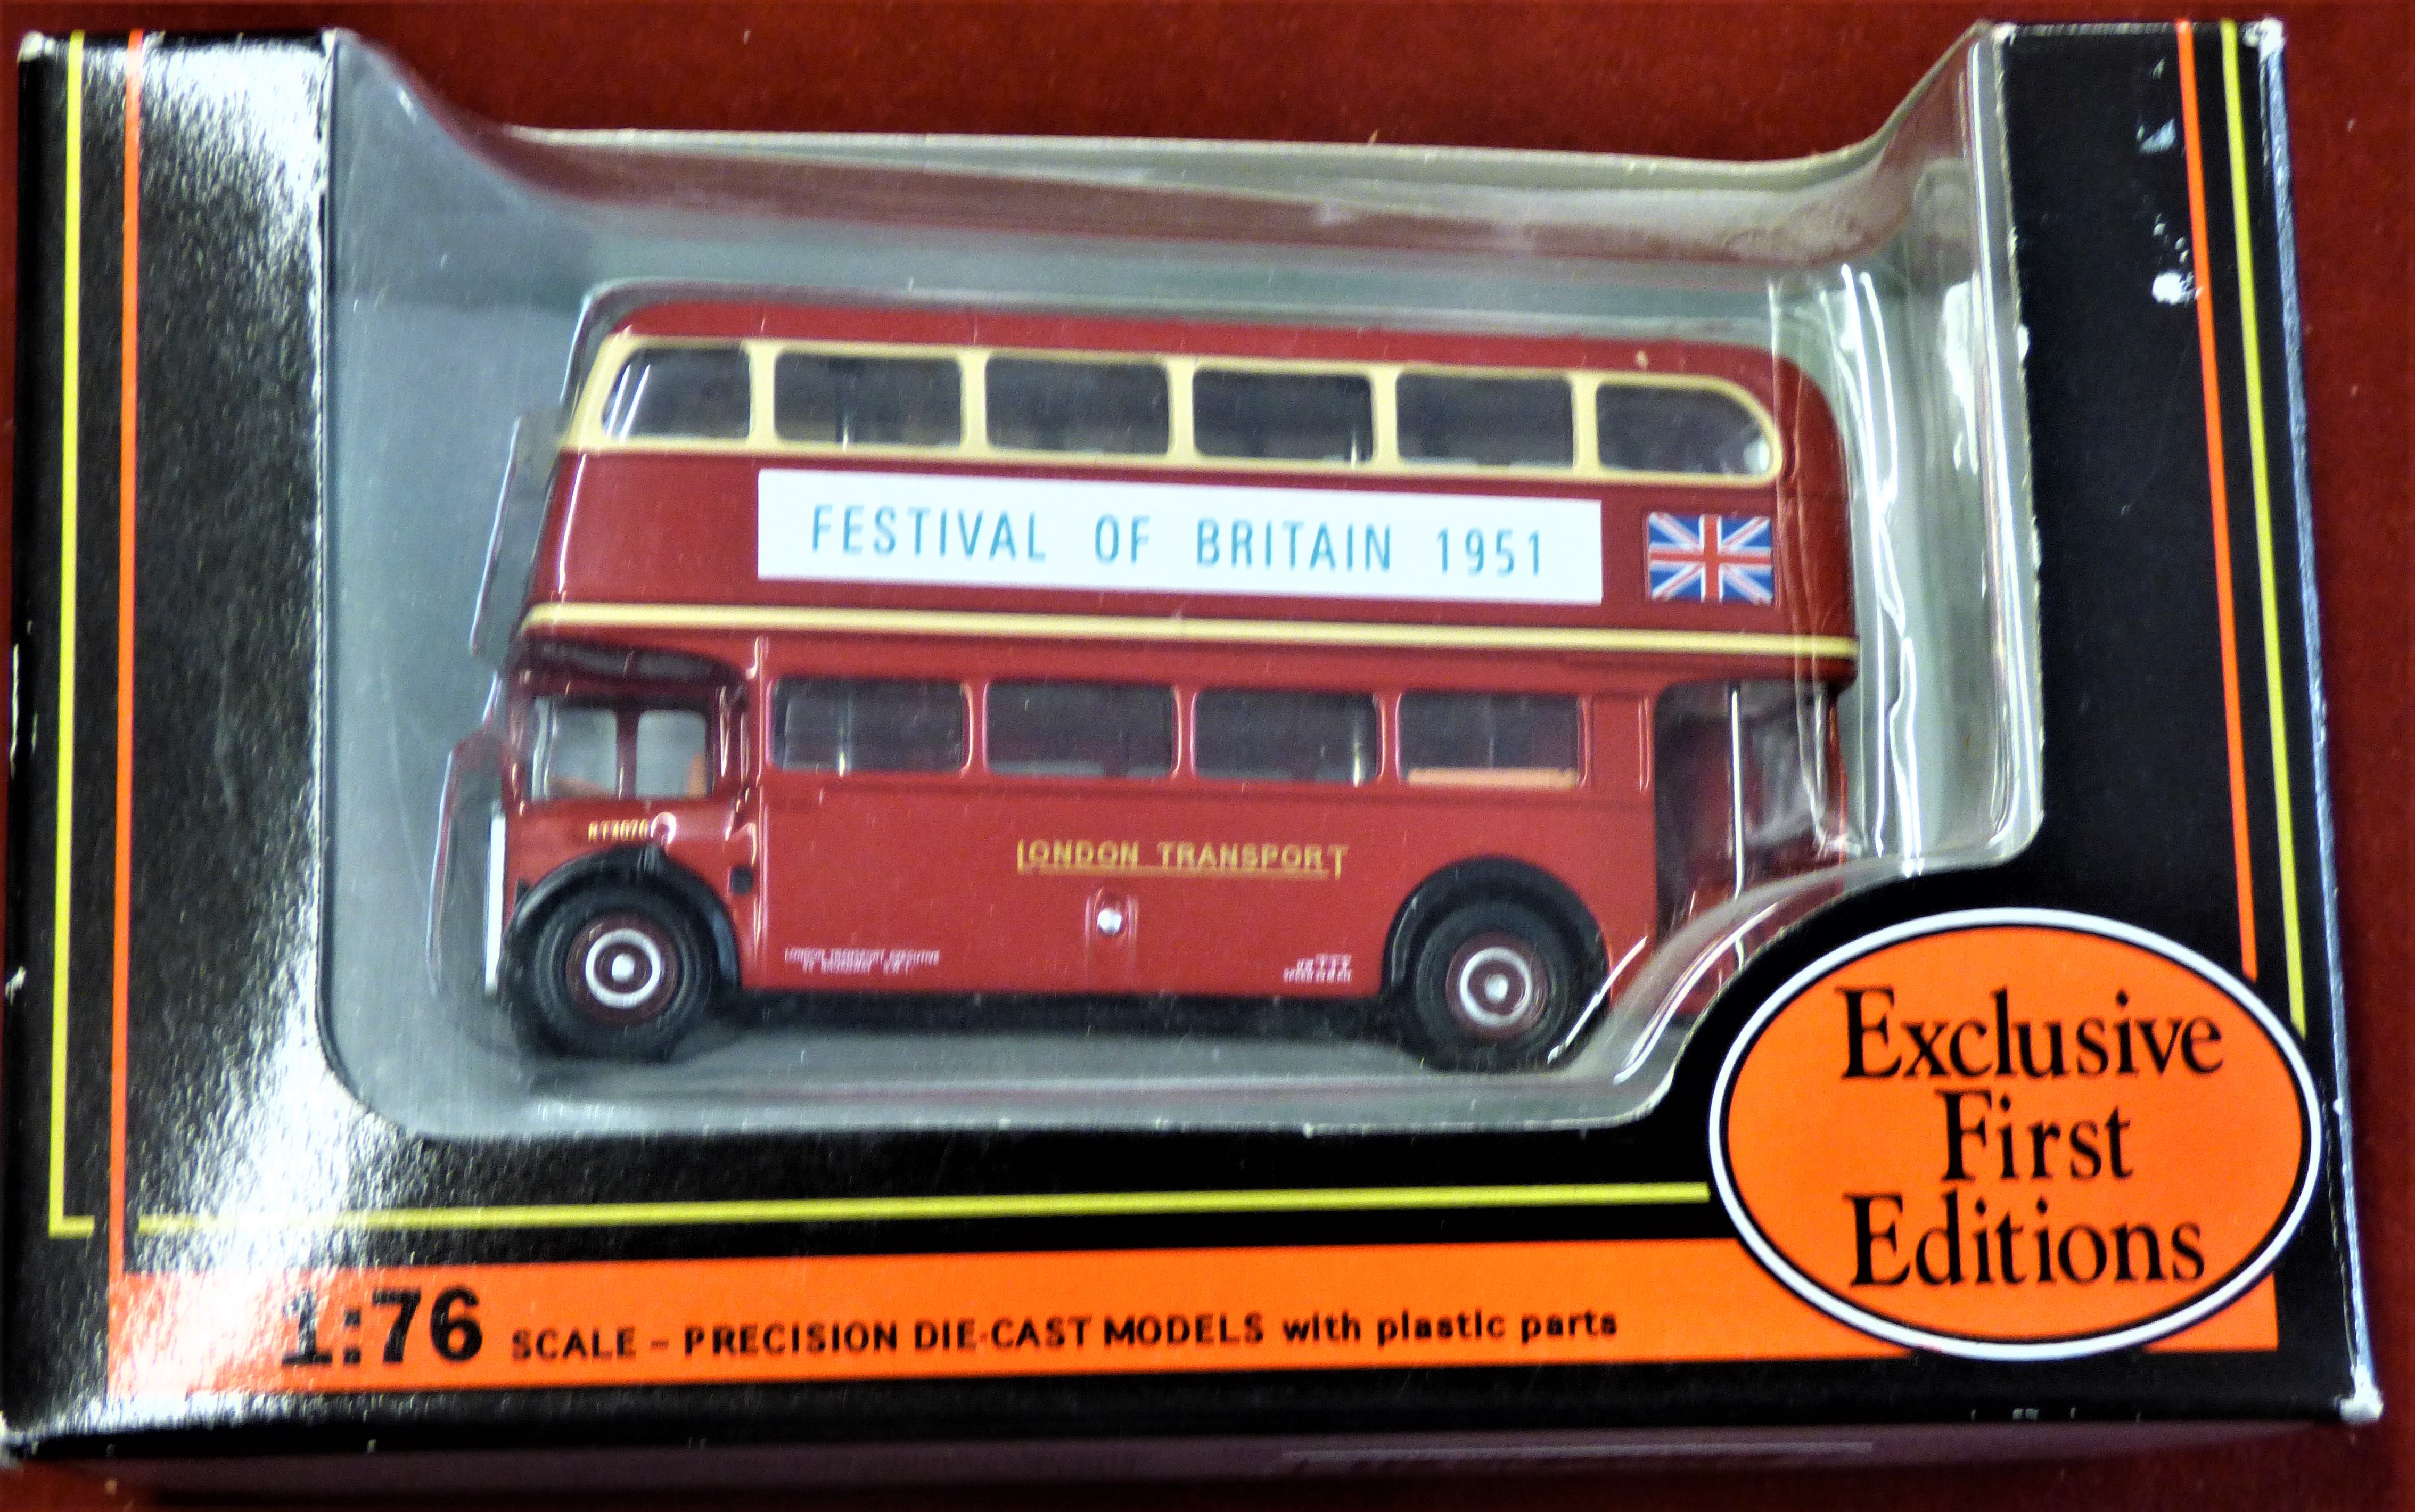 Festival of Britain AEC RT Bus London Transport Festival of Britain 10129 Exclusive First Editions